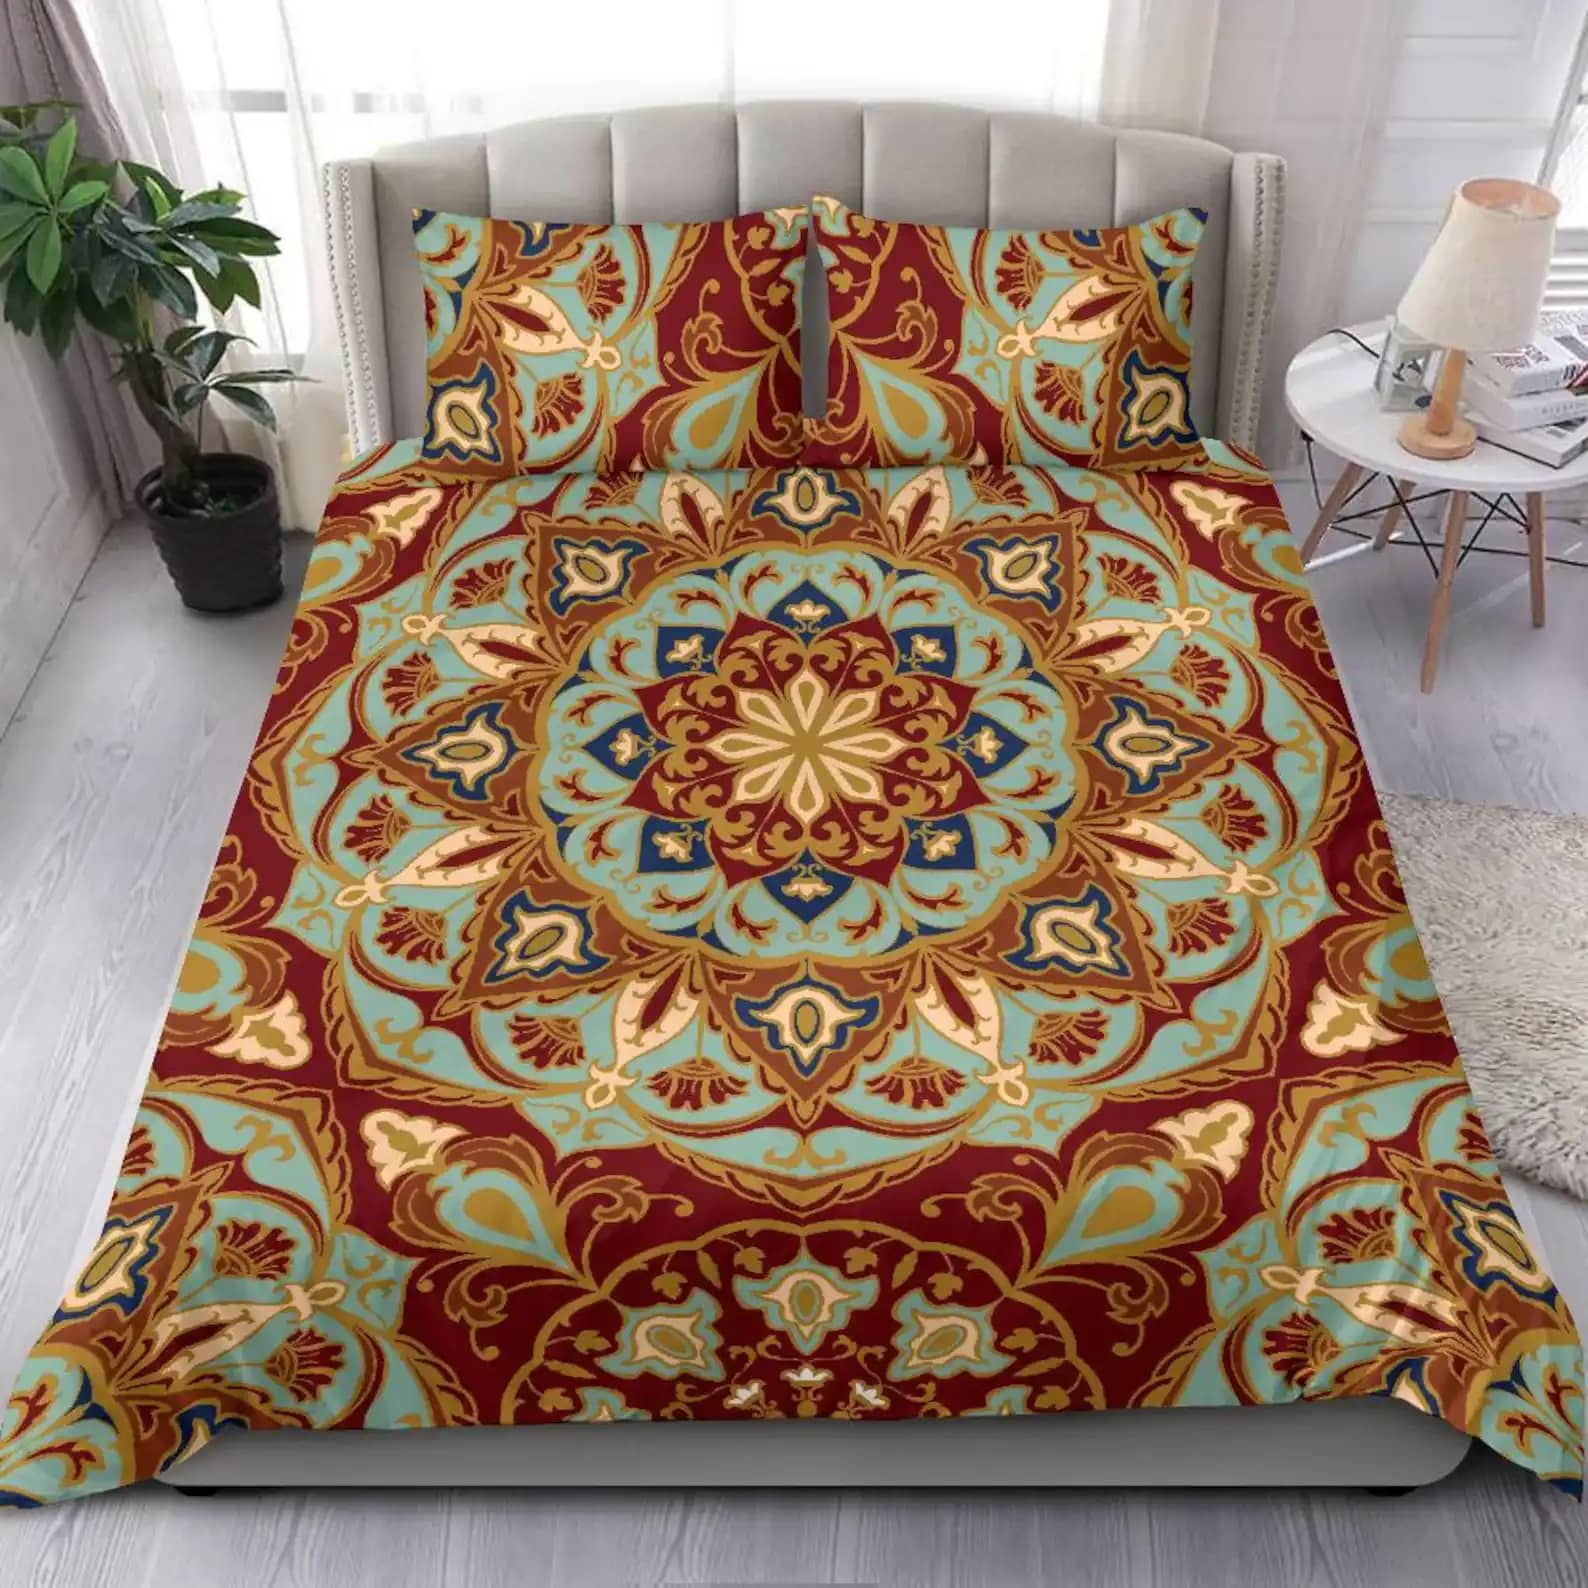 Indian Red And Turquoise Ornamental Mandala Bedroom Decor For Everyone Quilt Bedding Sets